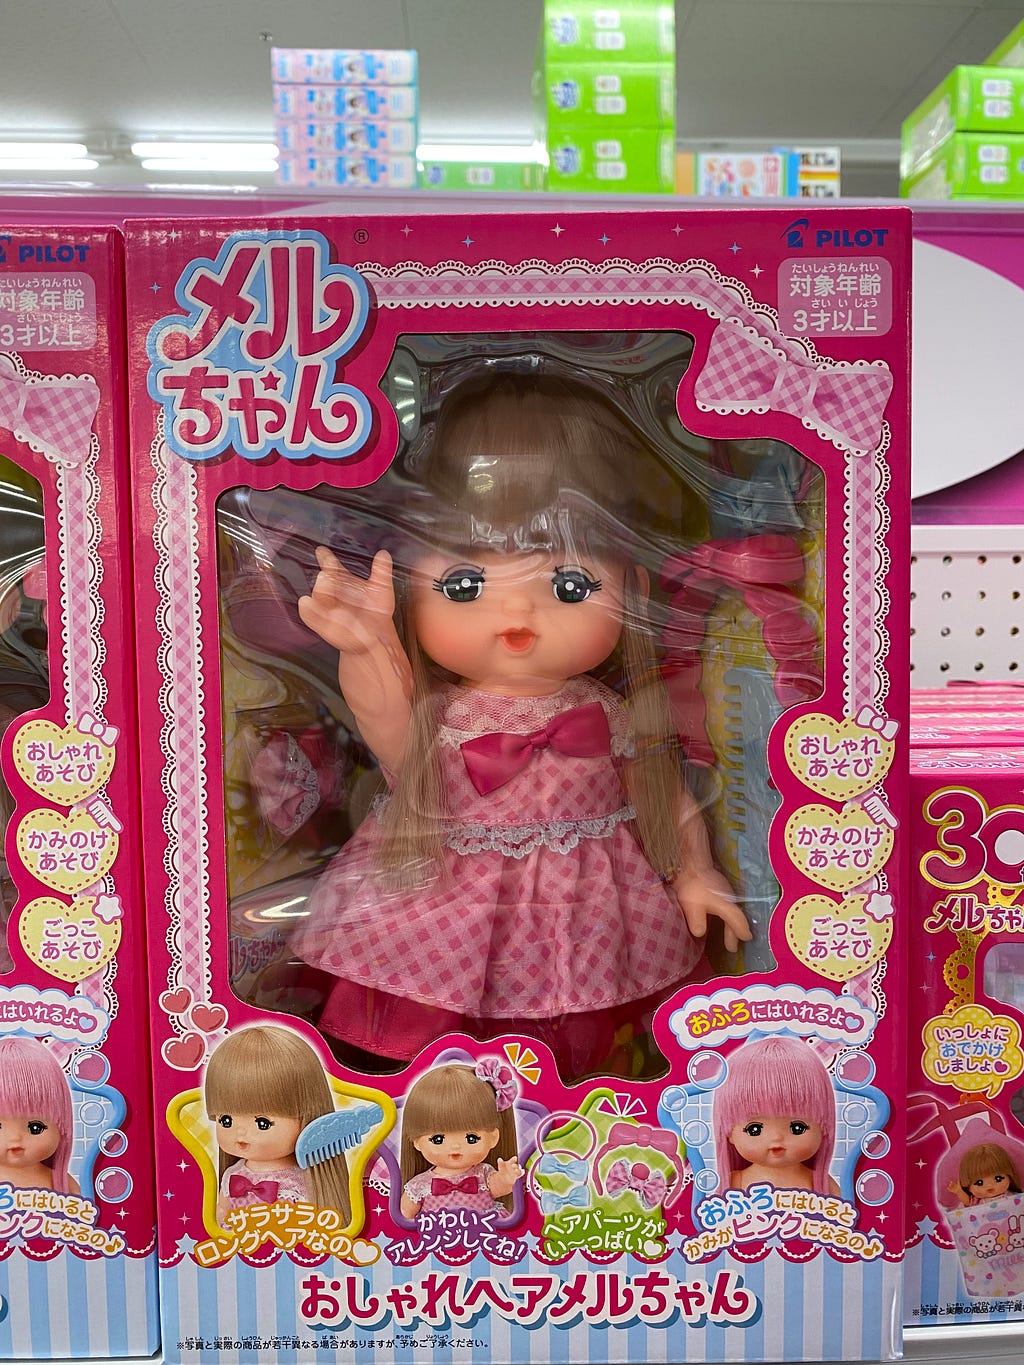 “Mel” is a popular doll sold in Japan with blond hair and rounded eyes.